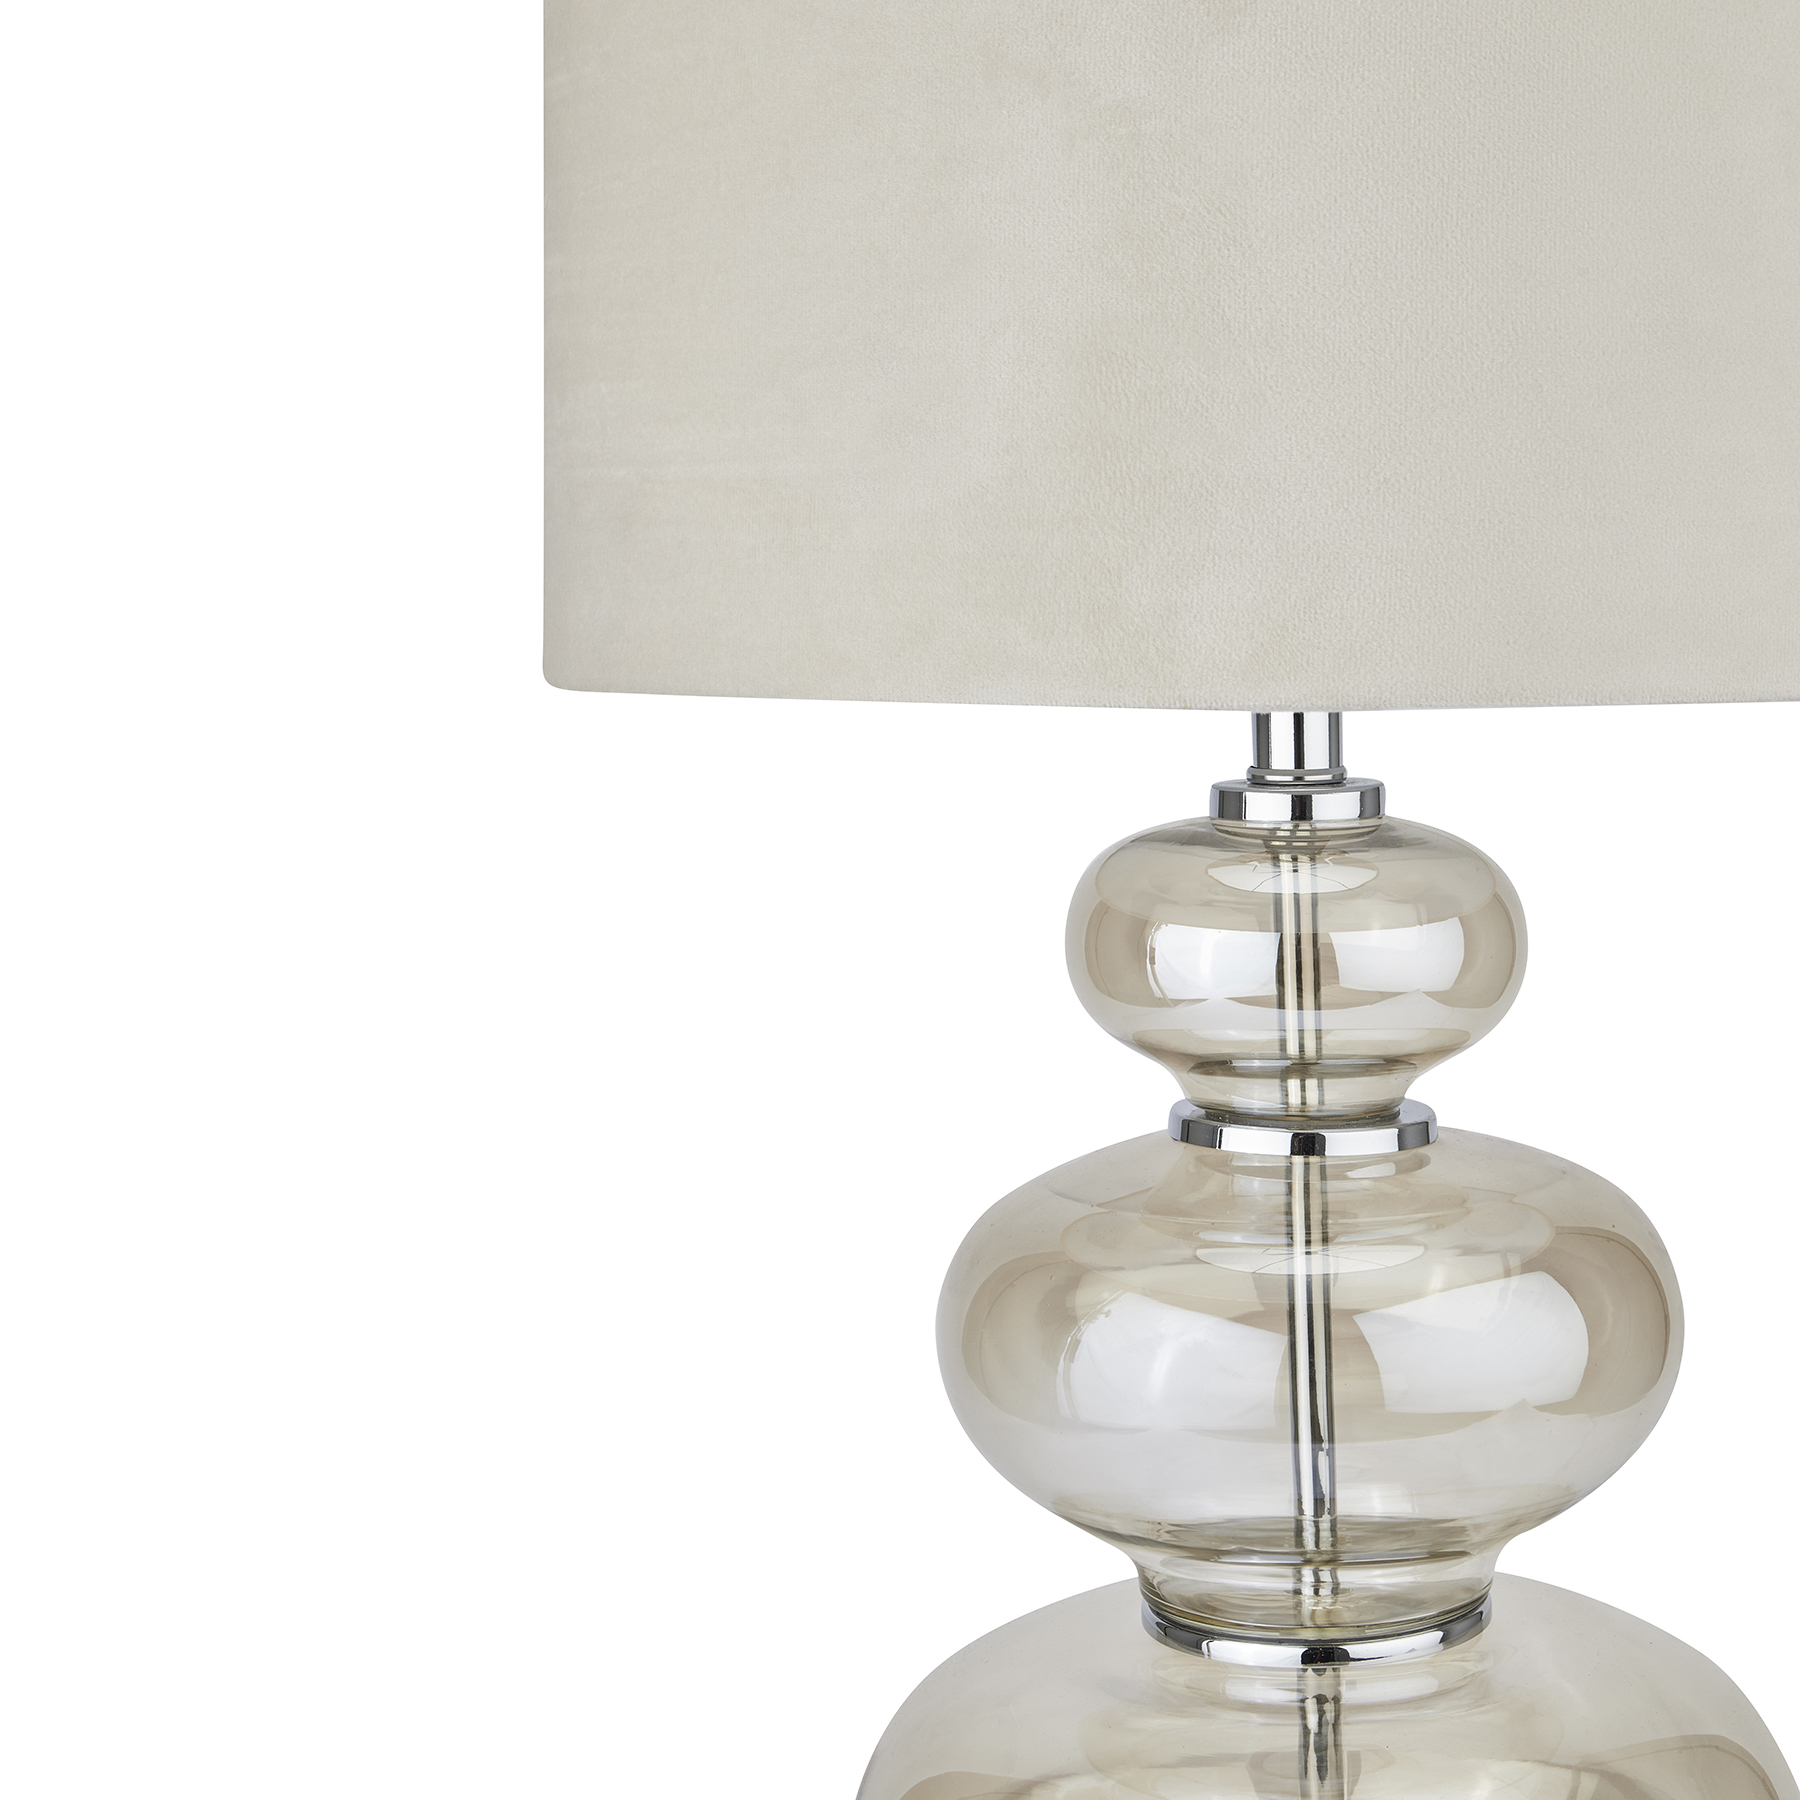 Justicia Metallic Glass Lamp With Velvet Shade - Image 3